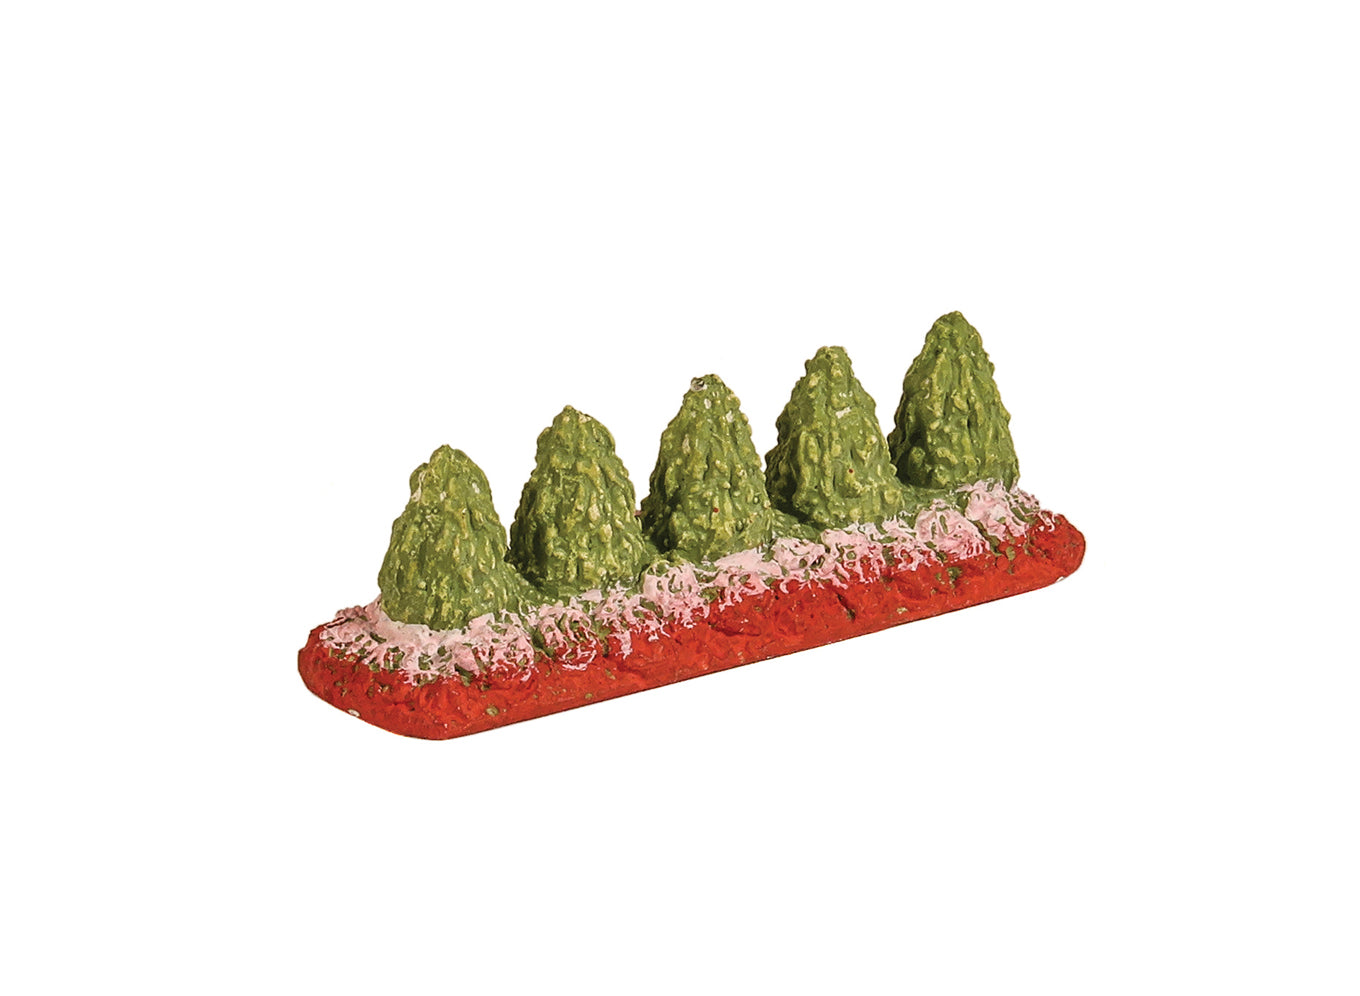 Flower Bed with 5 Miniature Trees